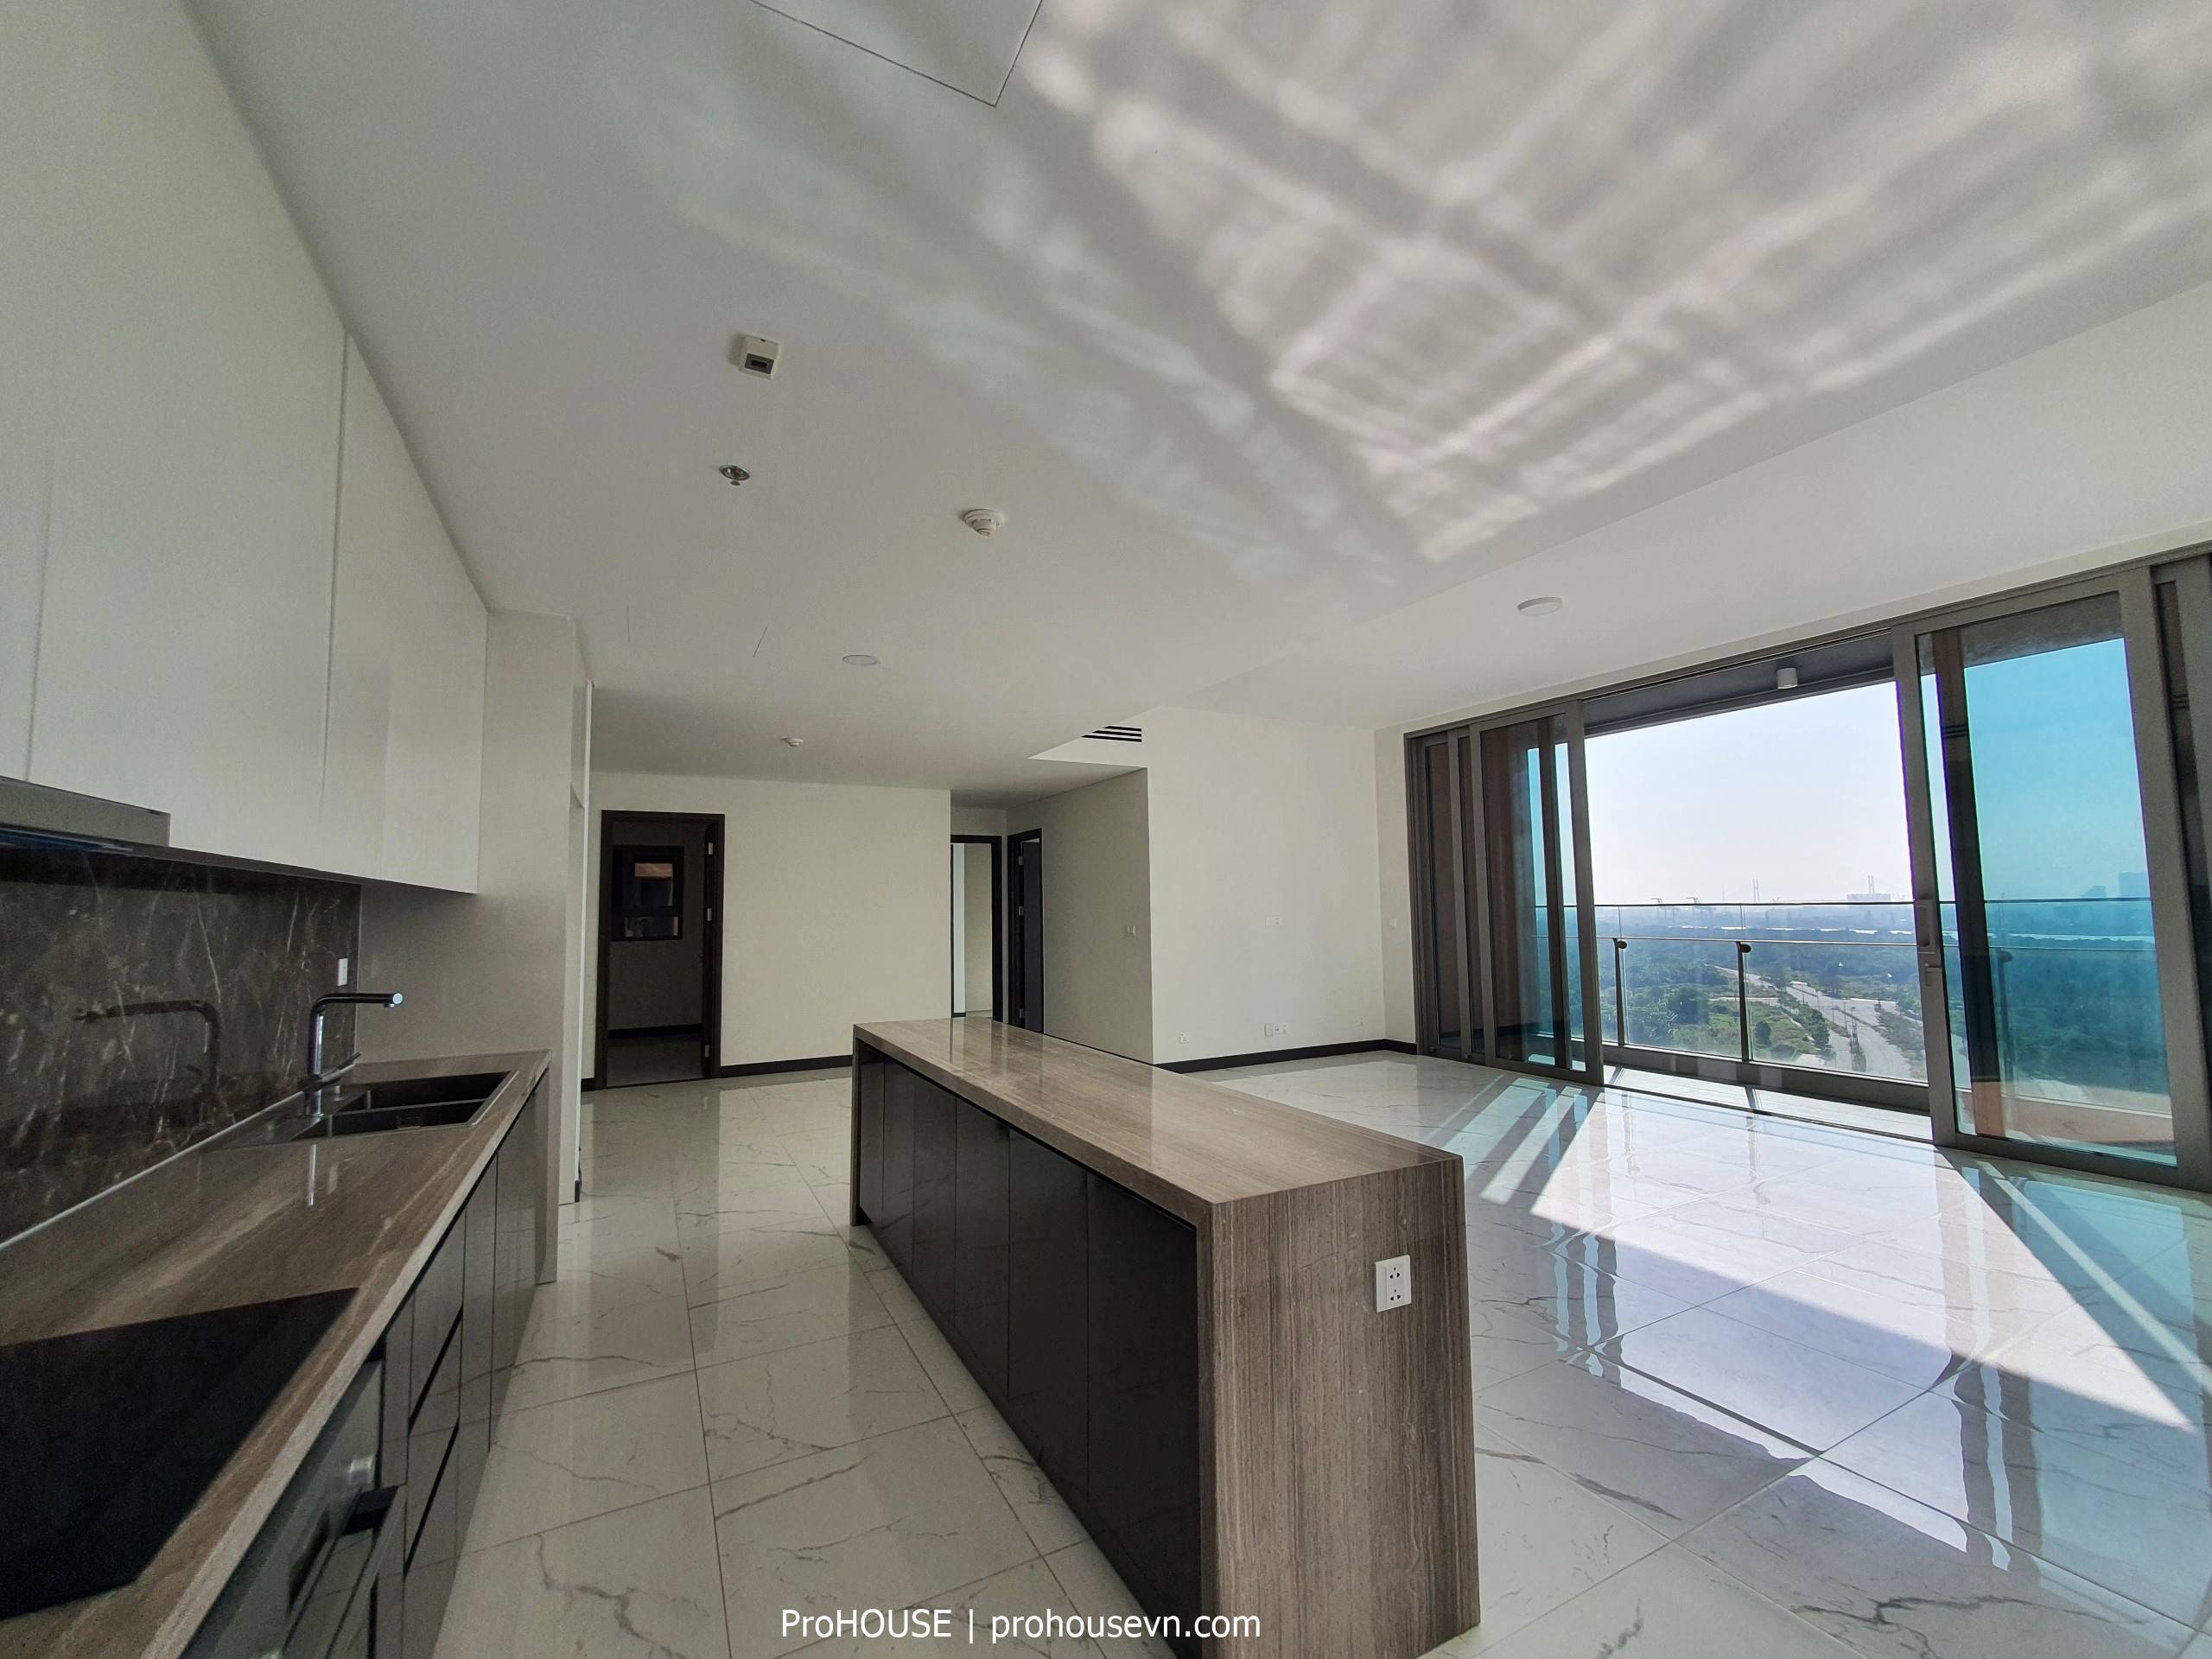 Empire City apartment 148sqm for rent with high floor view